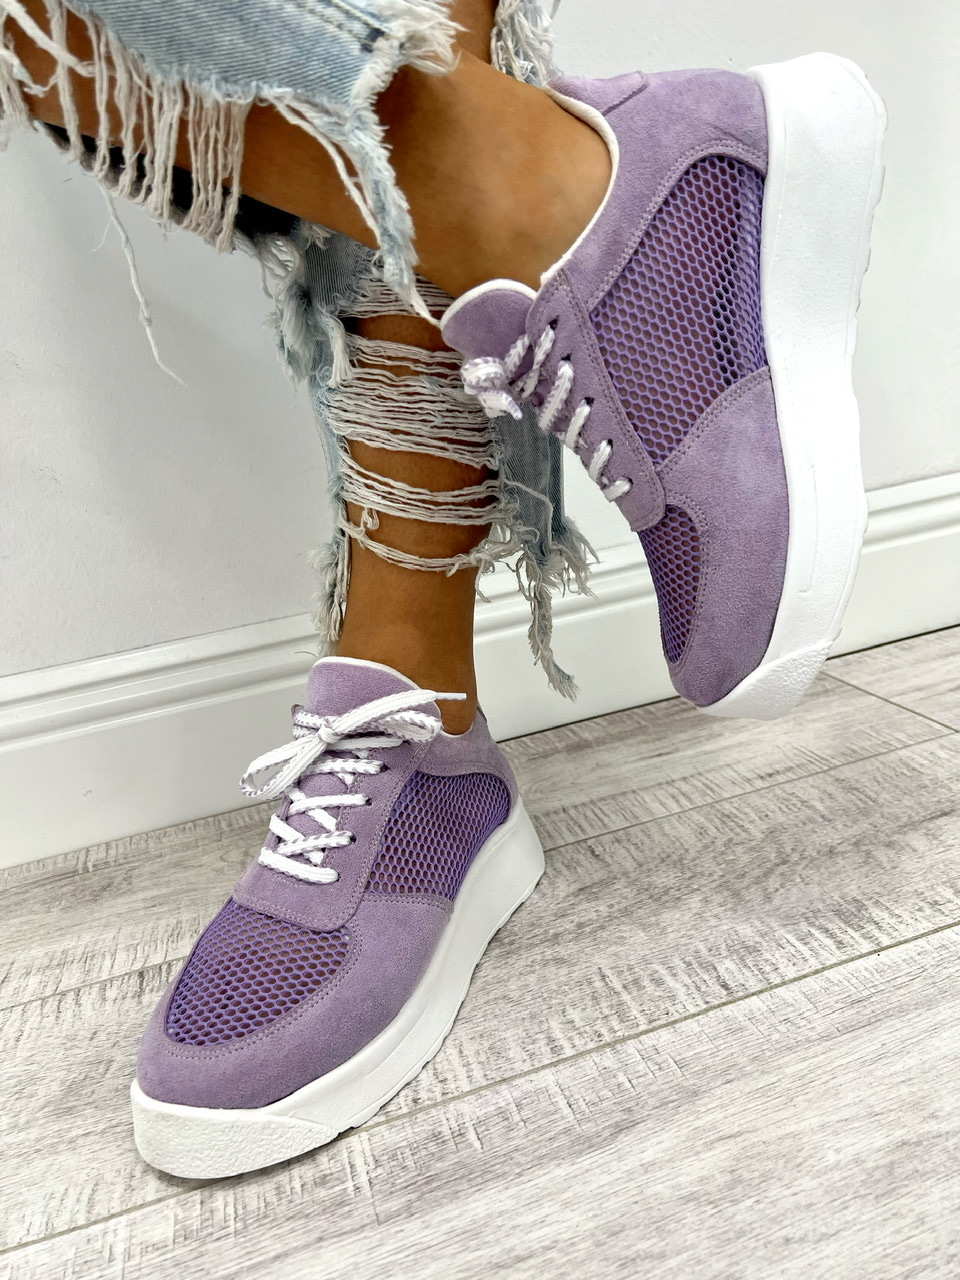 Women sneakers D601 - HOLLOW OUT - VIOLET